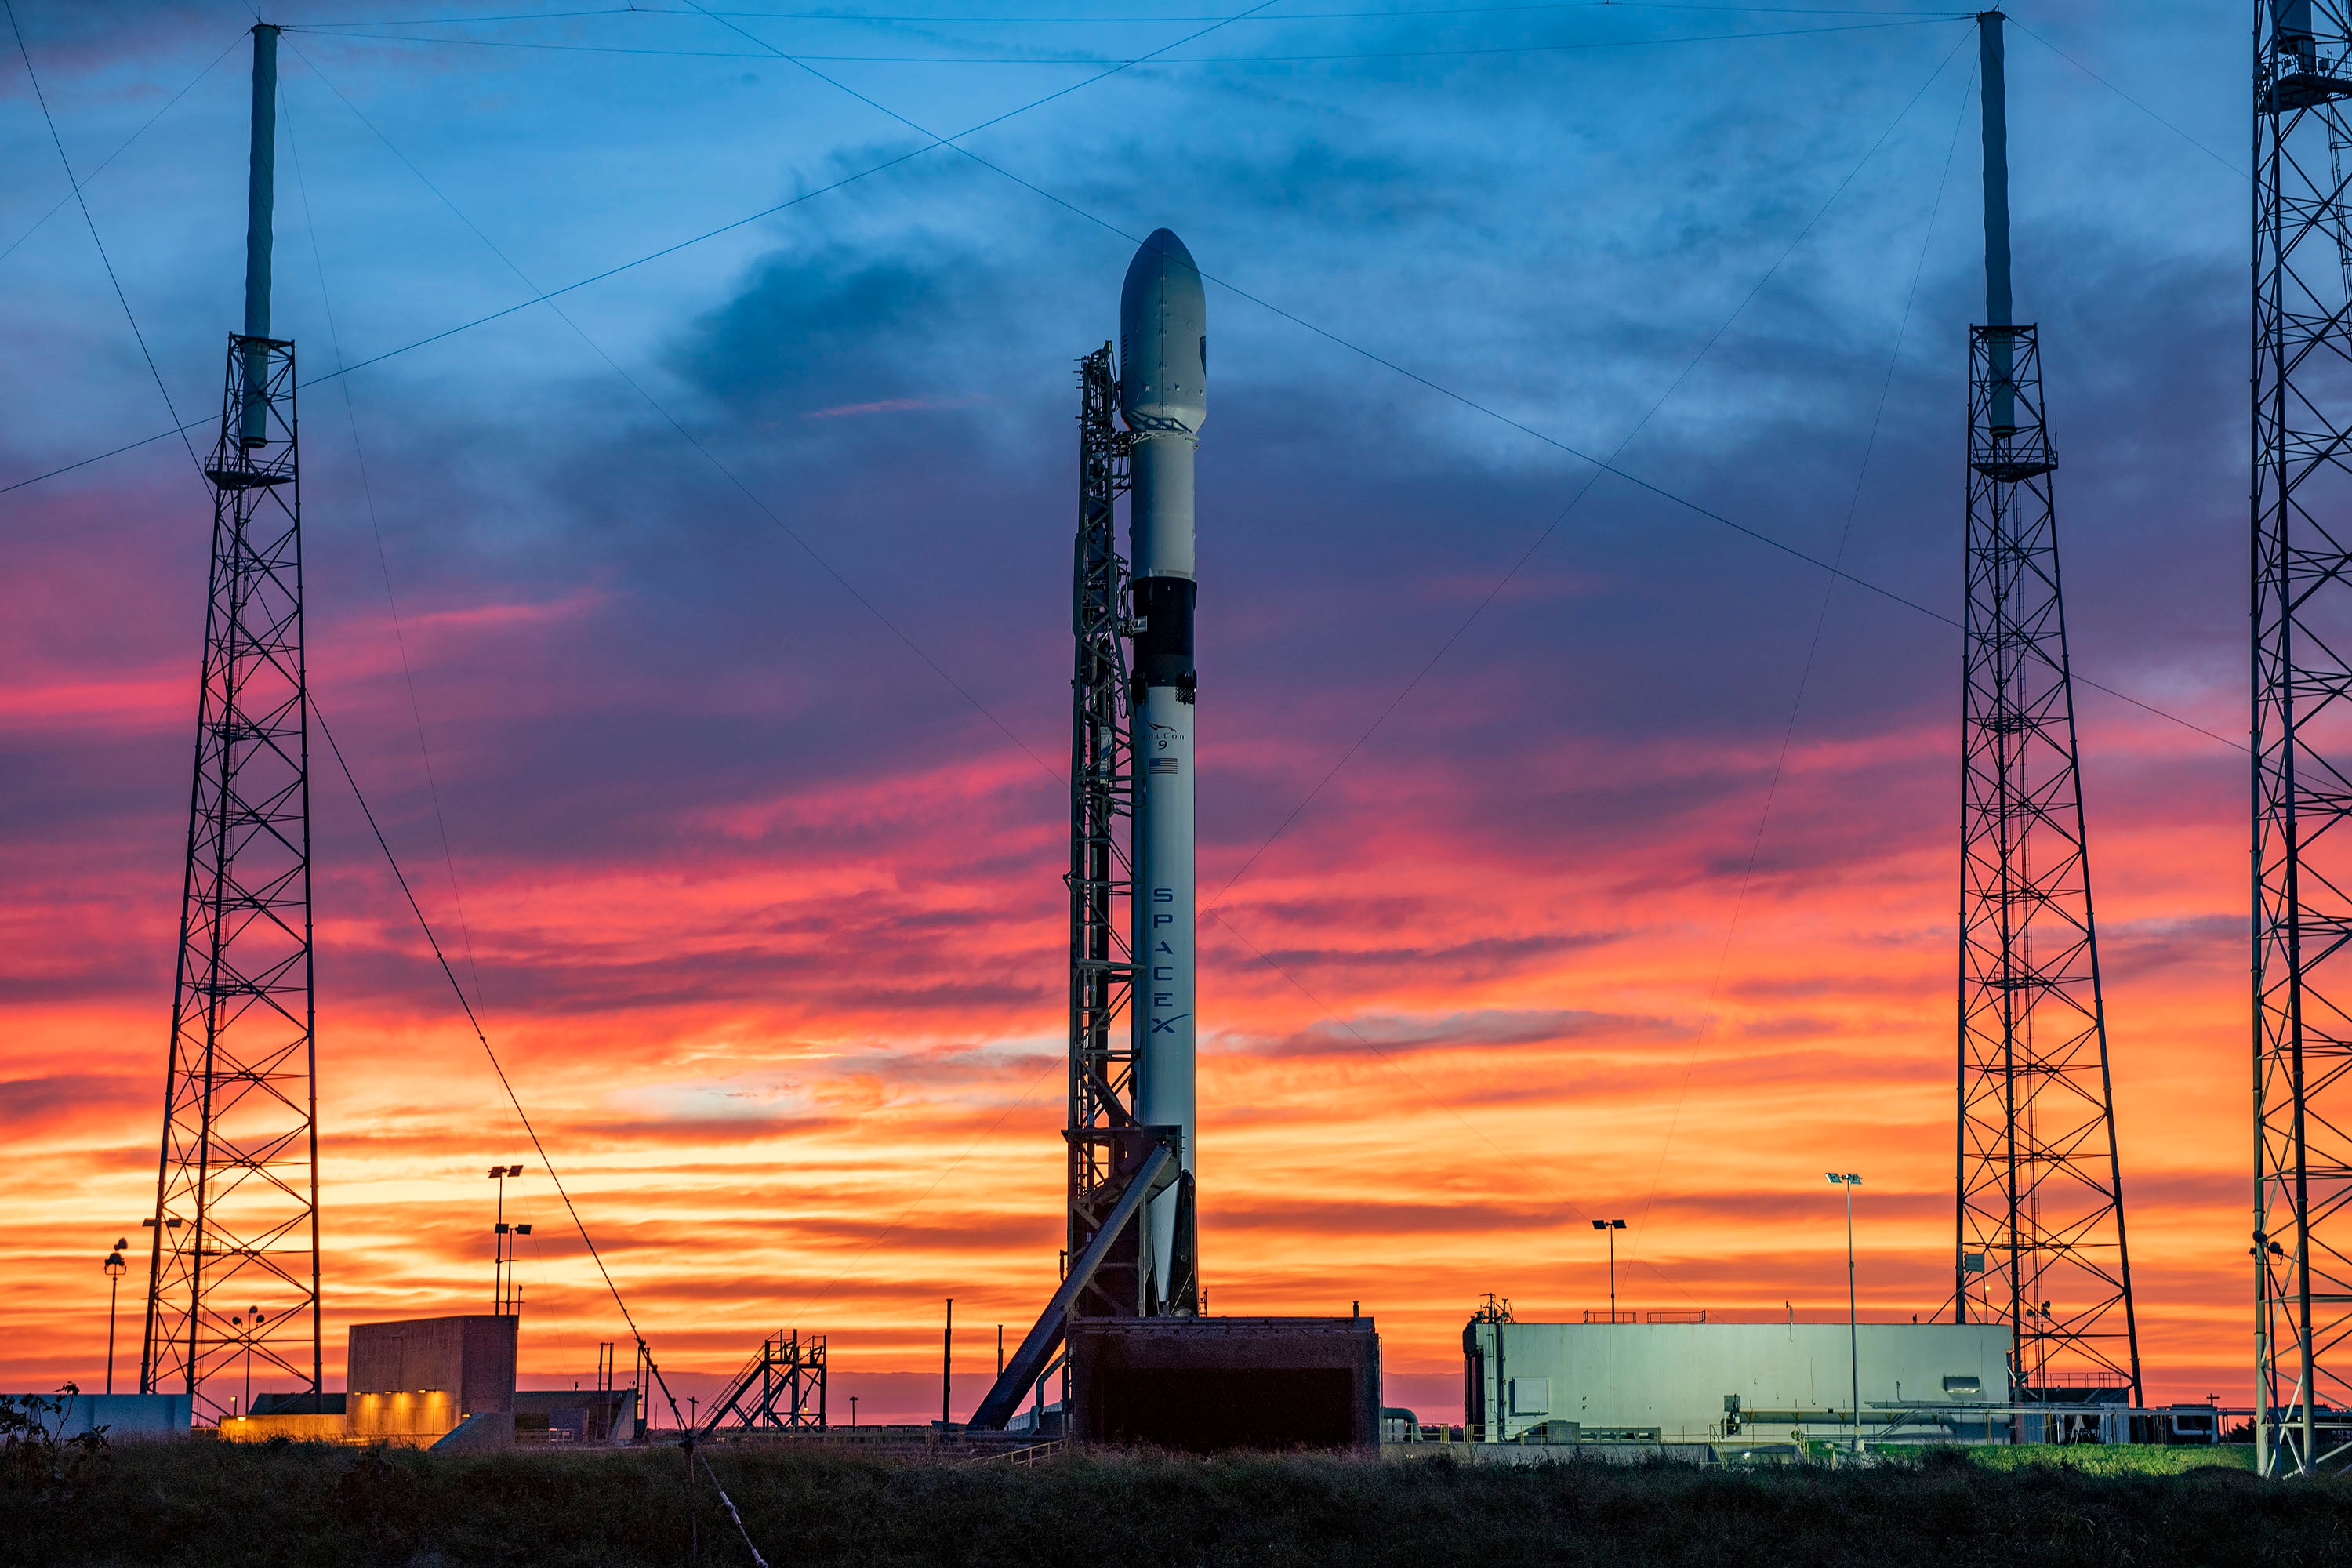 SpaceX is ready to deploy a GPS-III satellite for the U.S. Space Force tonight - Watch It Live!